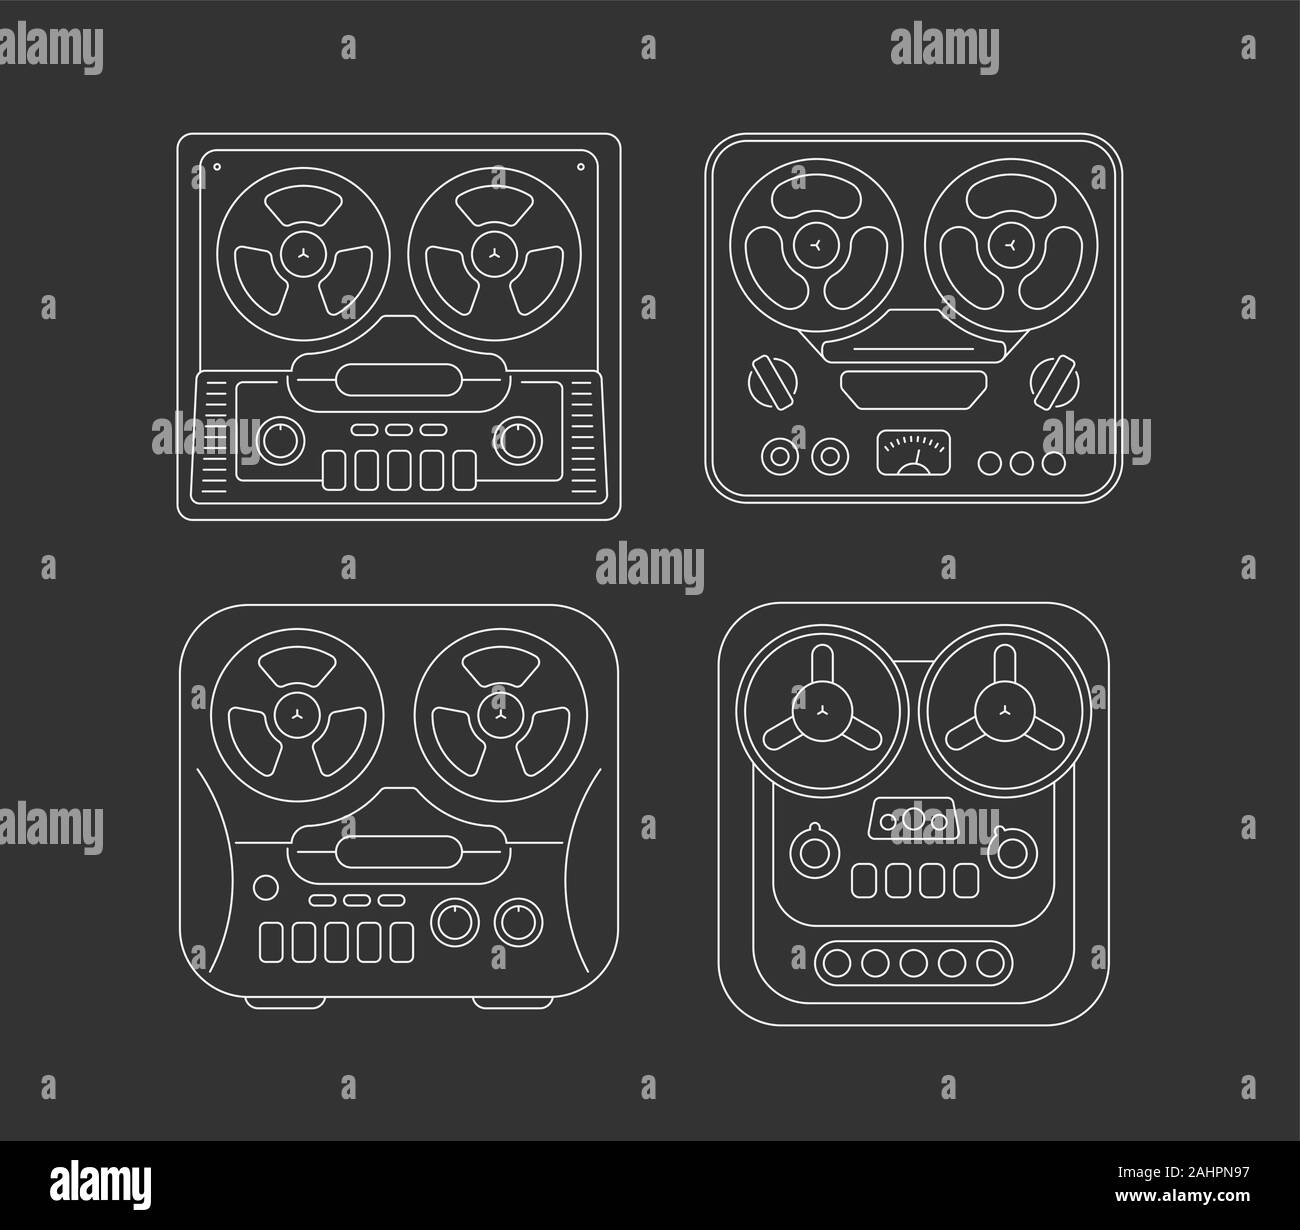 Vintage analog tape recorder Stock Vector Images - Alamy